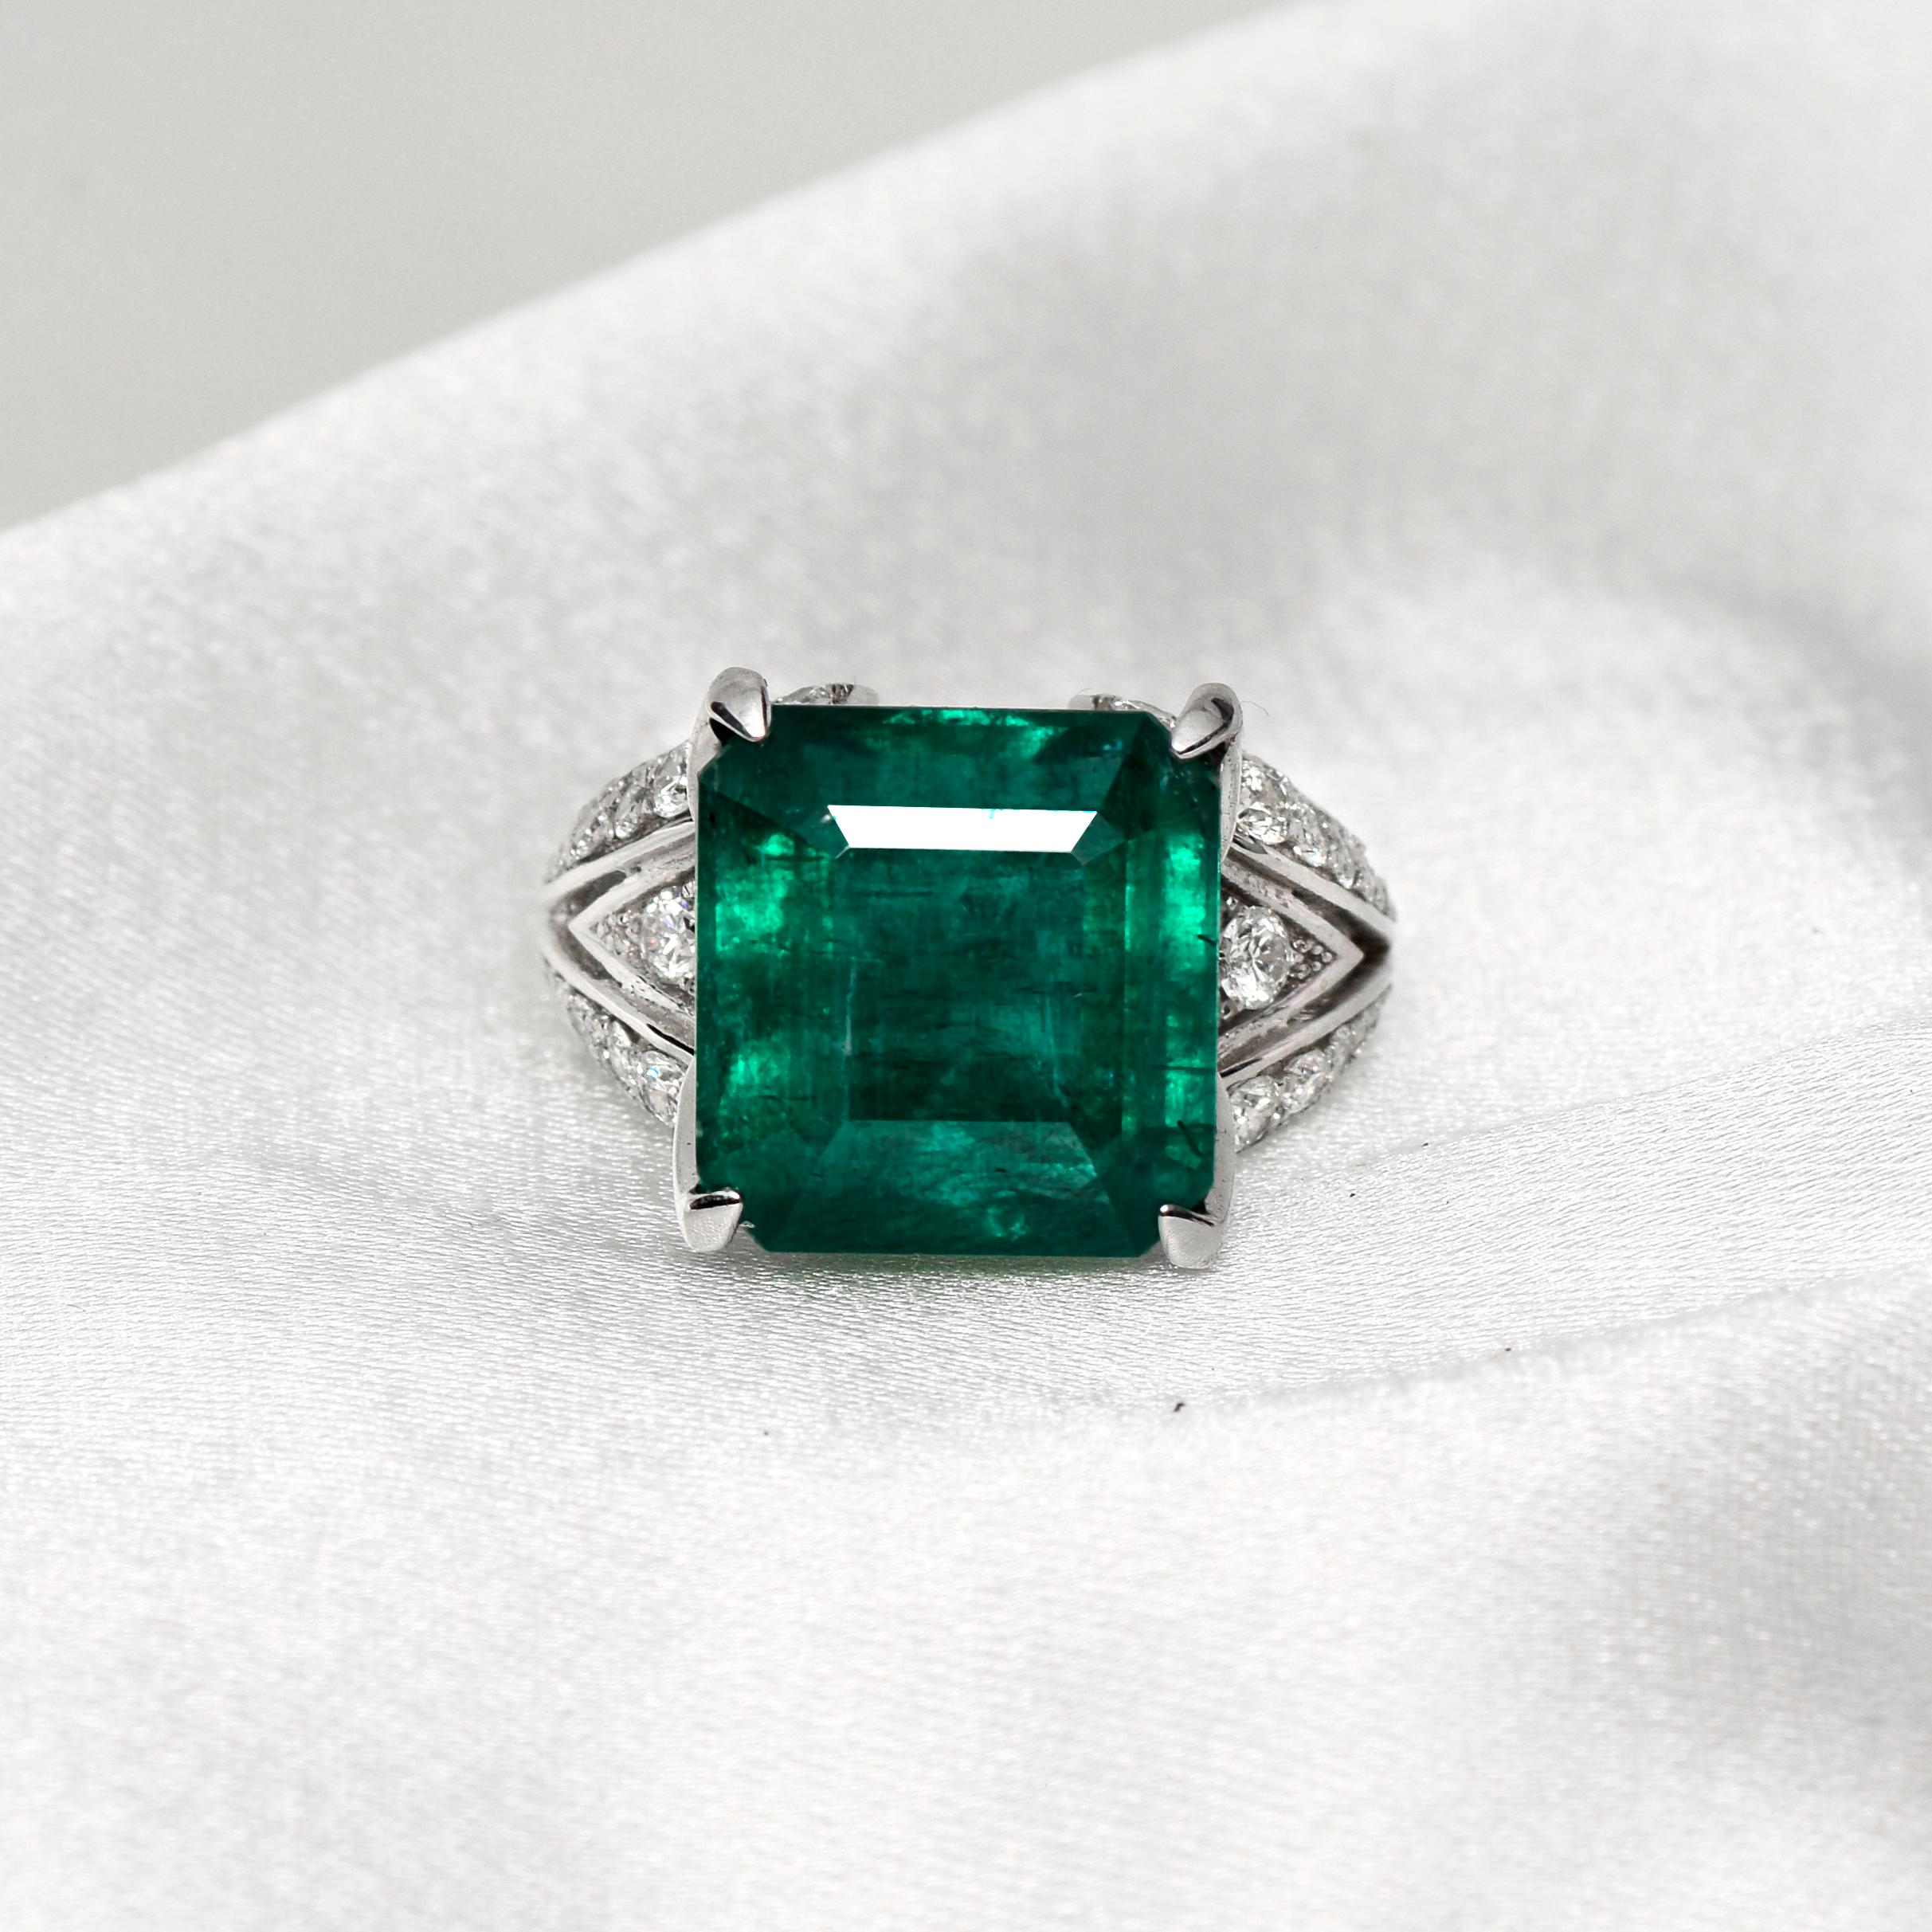 ** One IGI-Certified 18K White Gold 11.01 Ct Natural Emerald&Diamonds Engagement Ring **
One IGI-Certified natural Zambia deep green emerald weighing 11.01 ct set on the 18K white gold band with natural FG VS accent diamonds weighing 1.52 ct. and